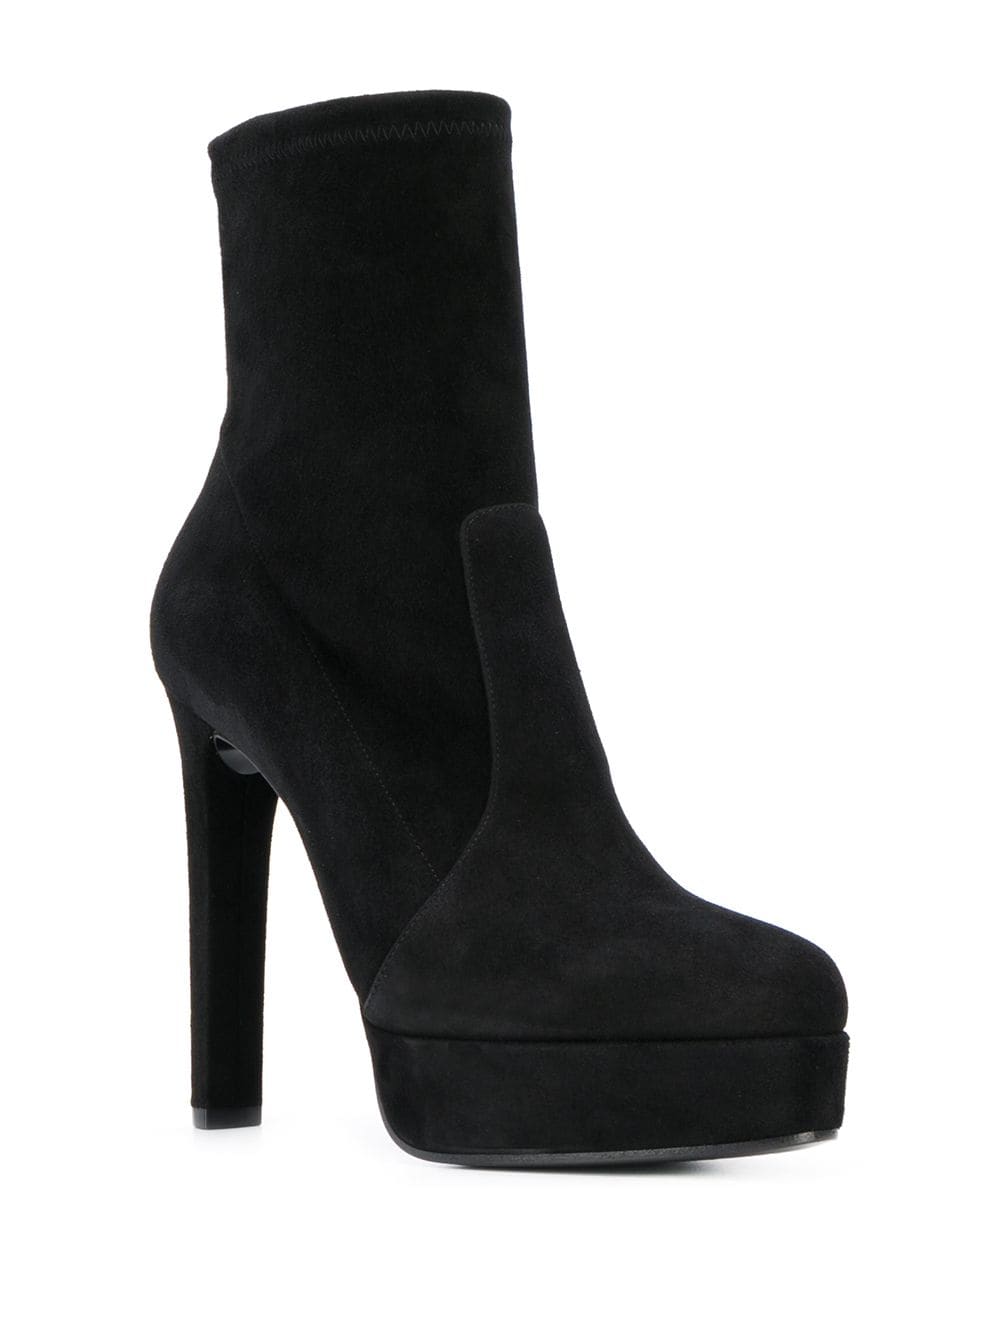 Casadei Heeled Ankle Boots - Farfetch